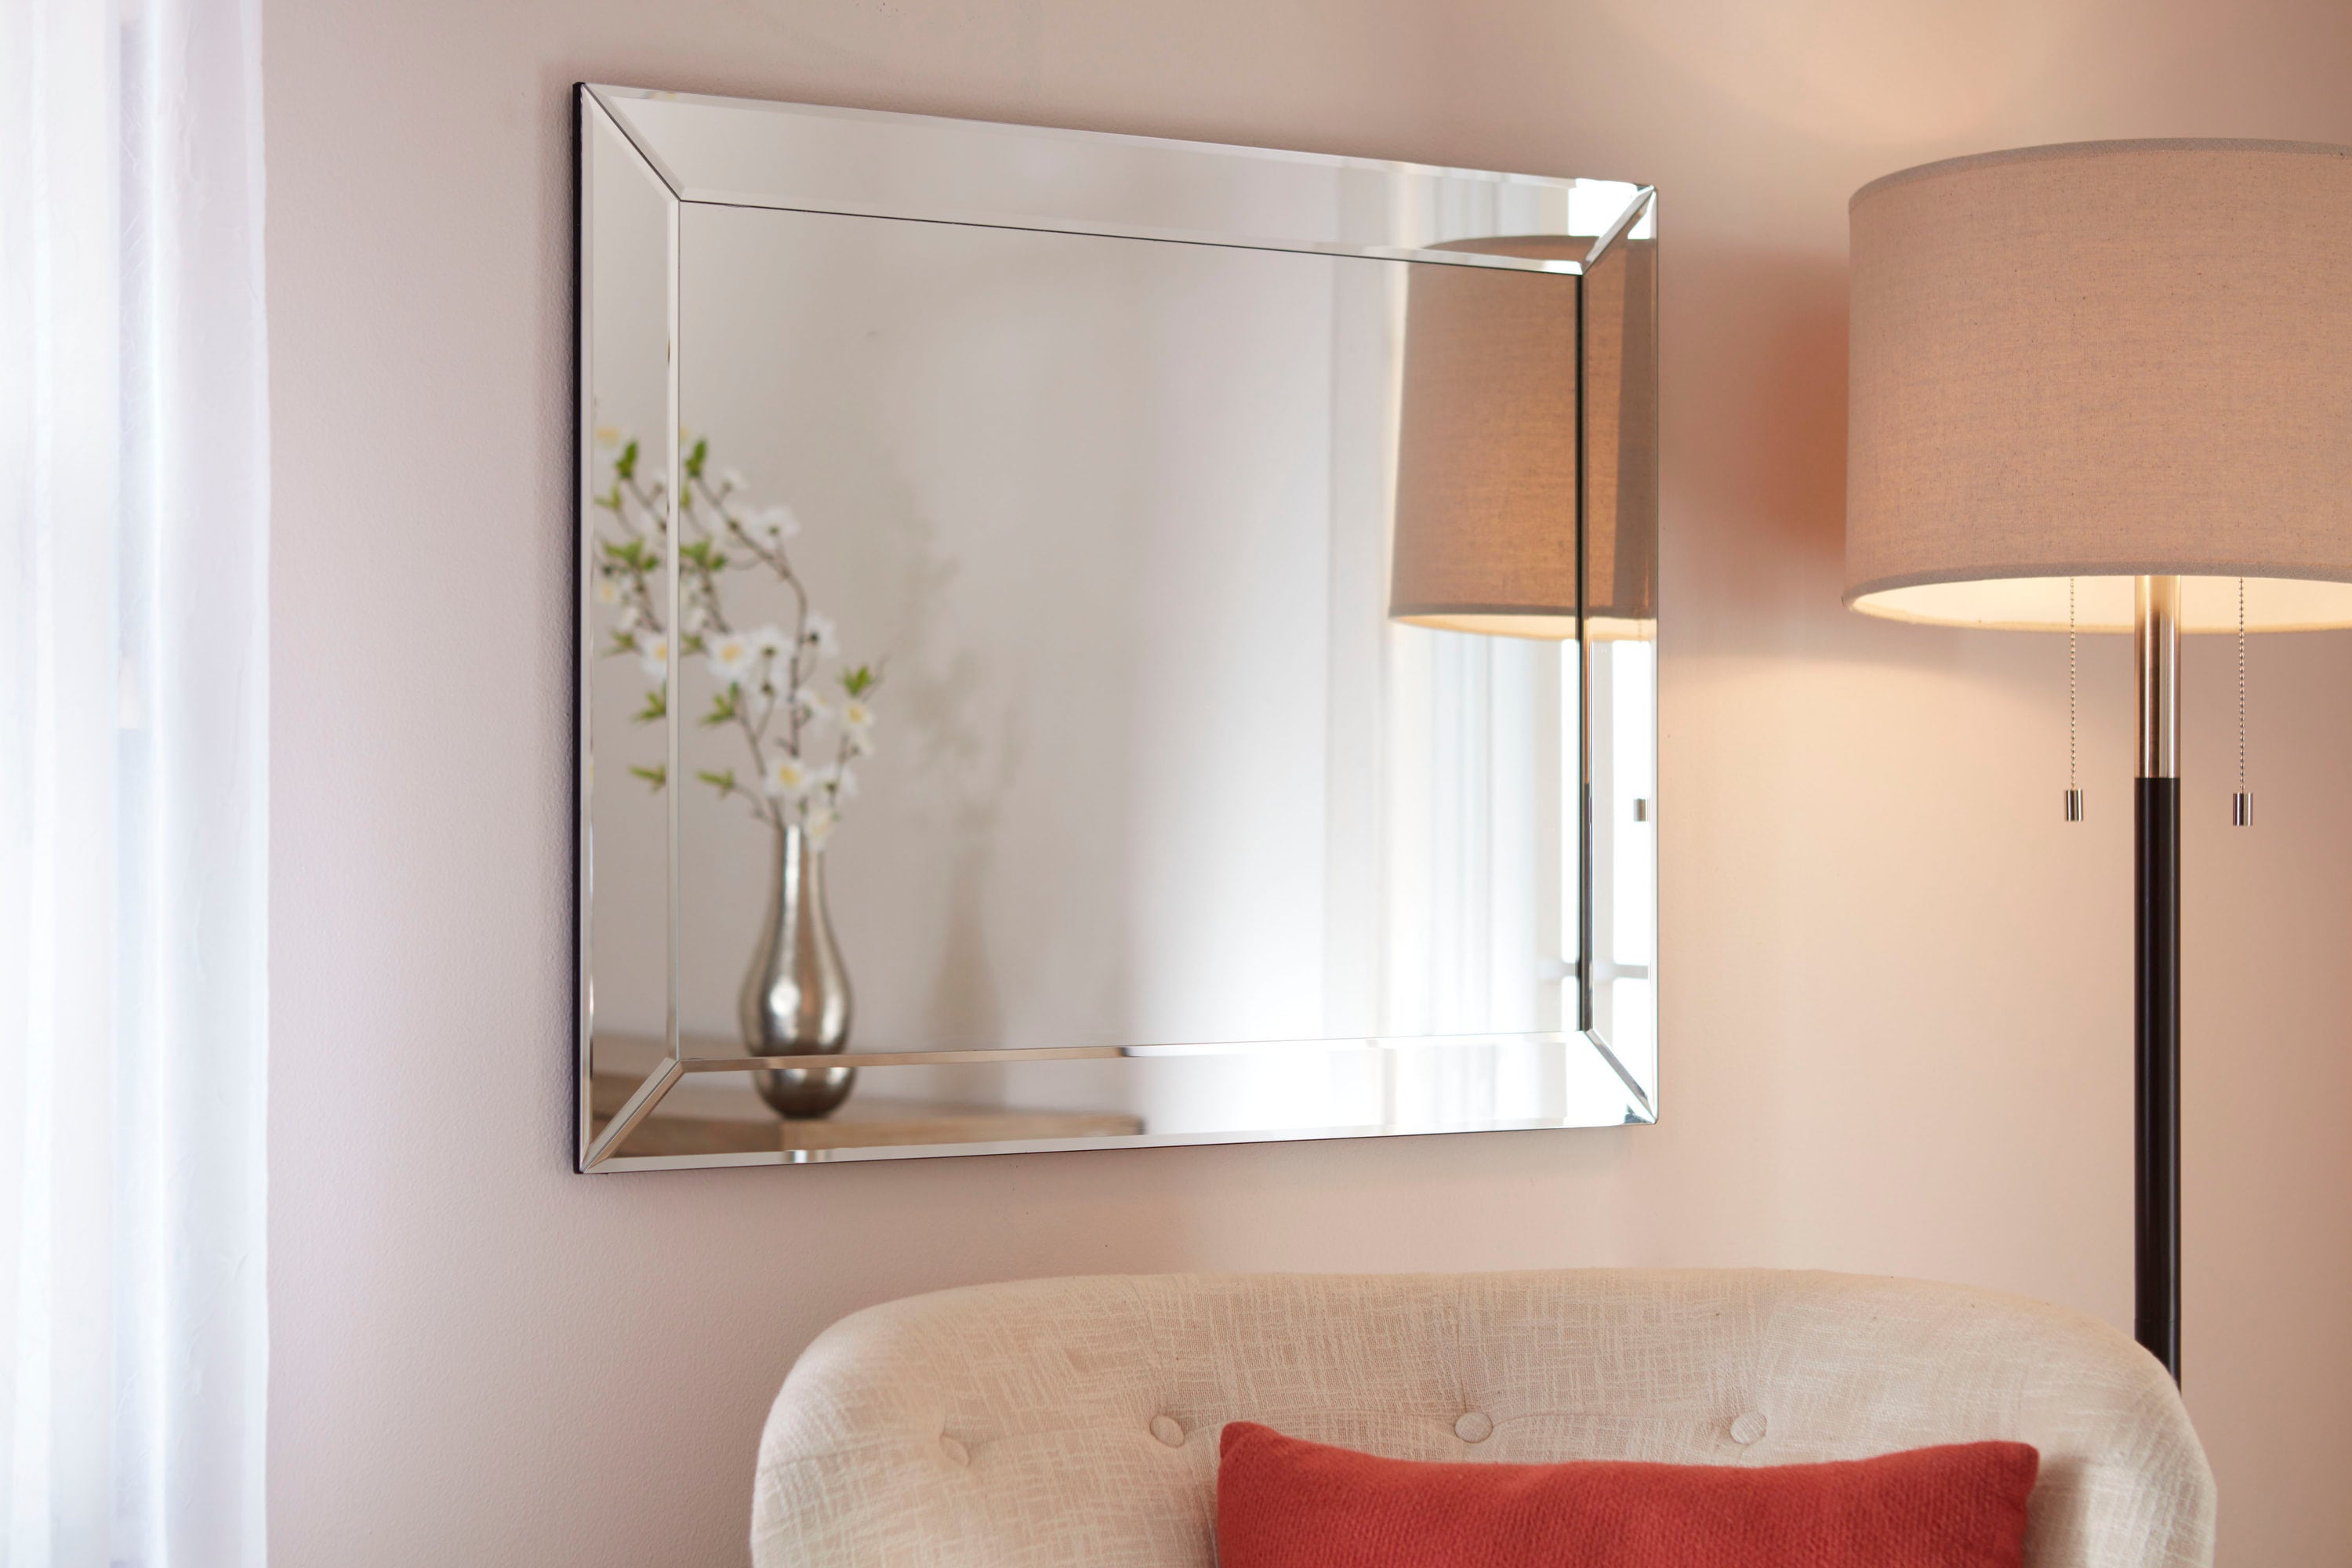 allen + roth 30-in W x 36-in H Silver Leaf Beveled Wall Mirror at